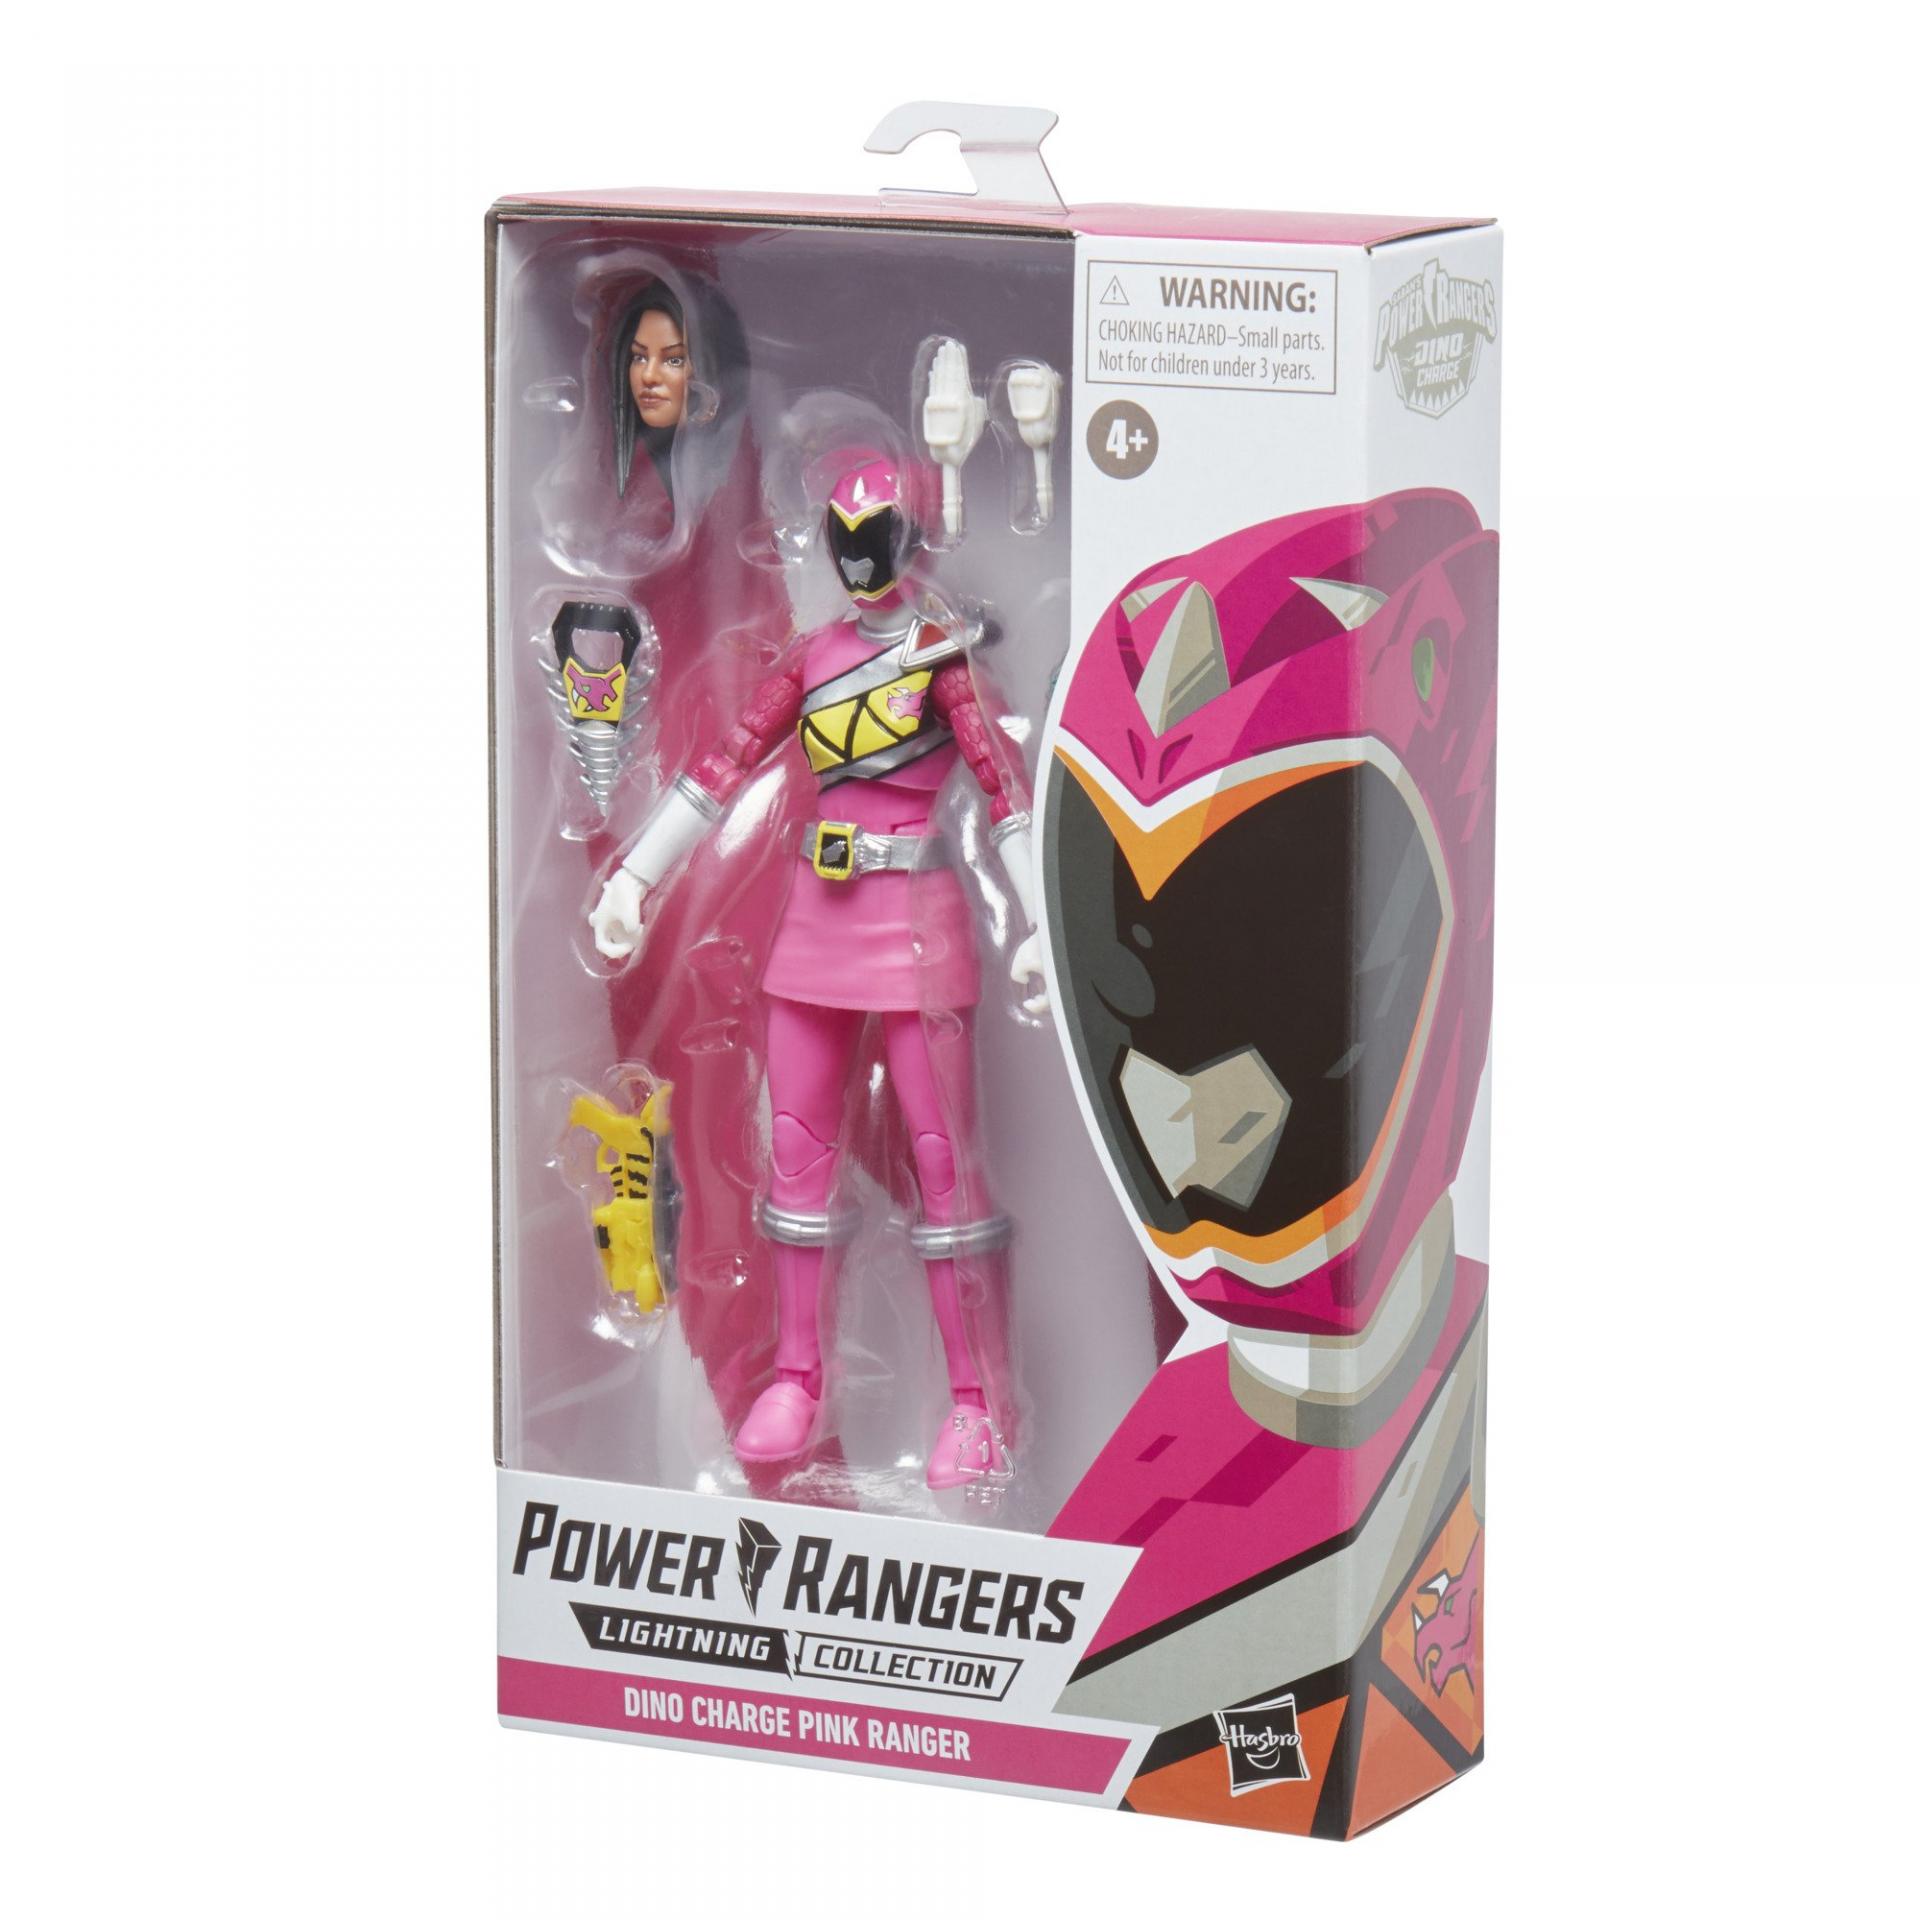 Power rangers lightning collection dino charge pink ranger6